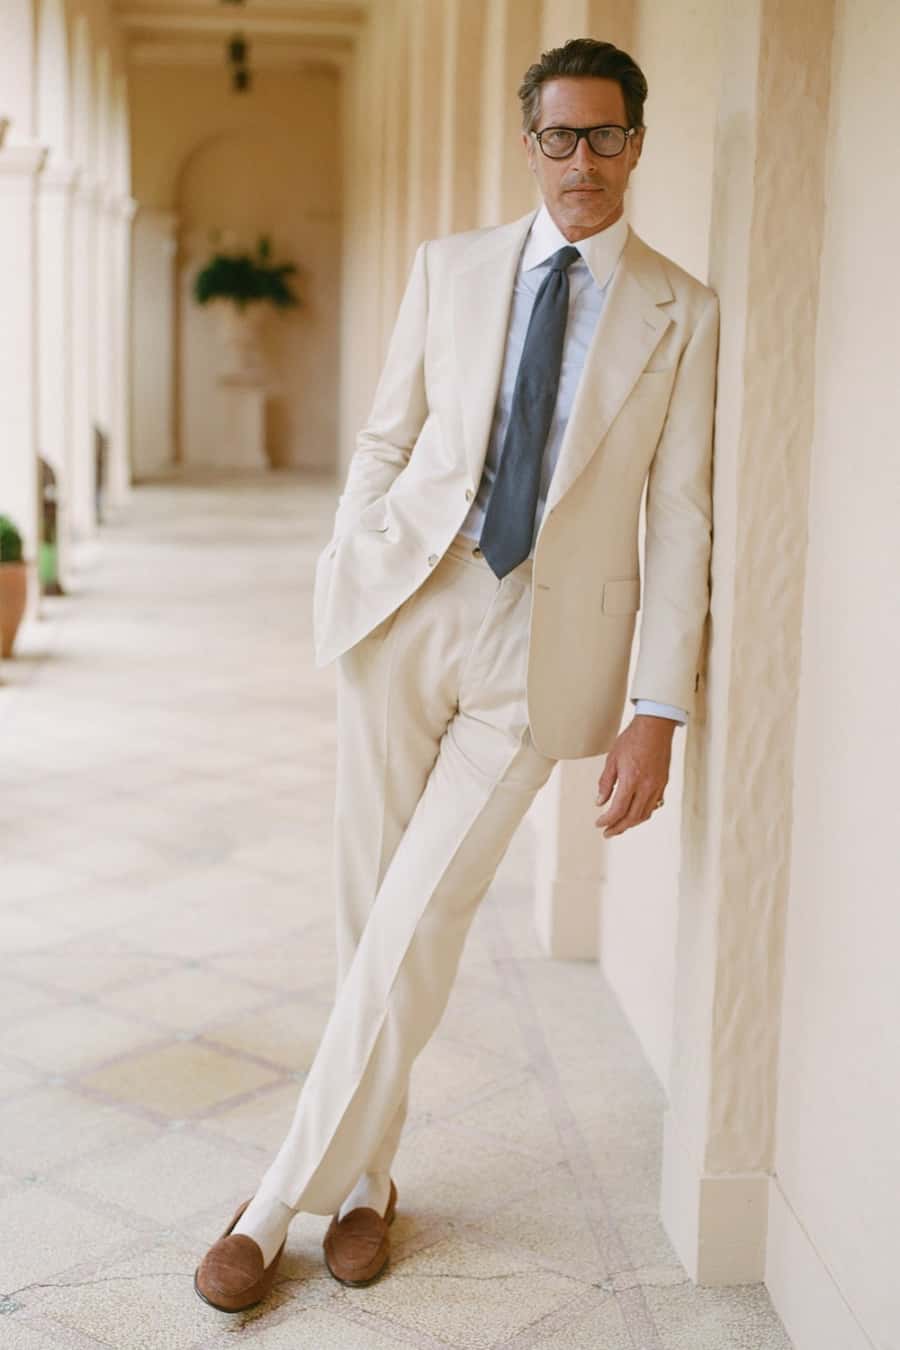 A man in a white made-to-measure suit